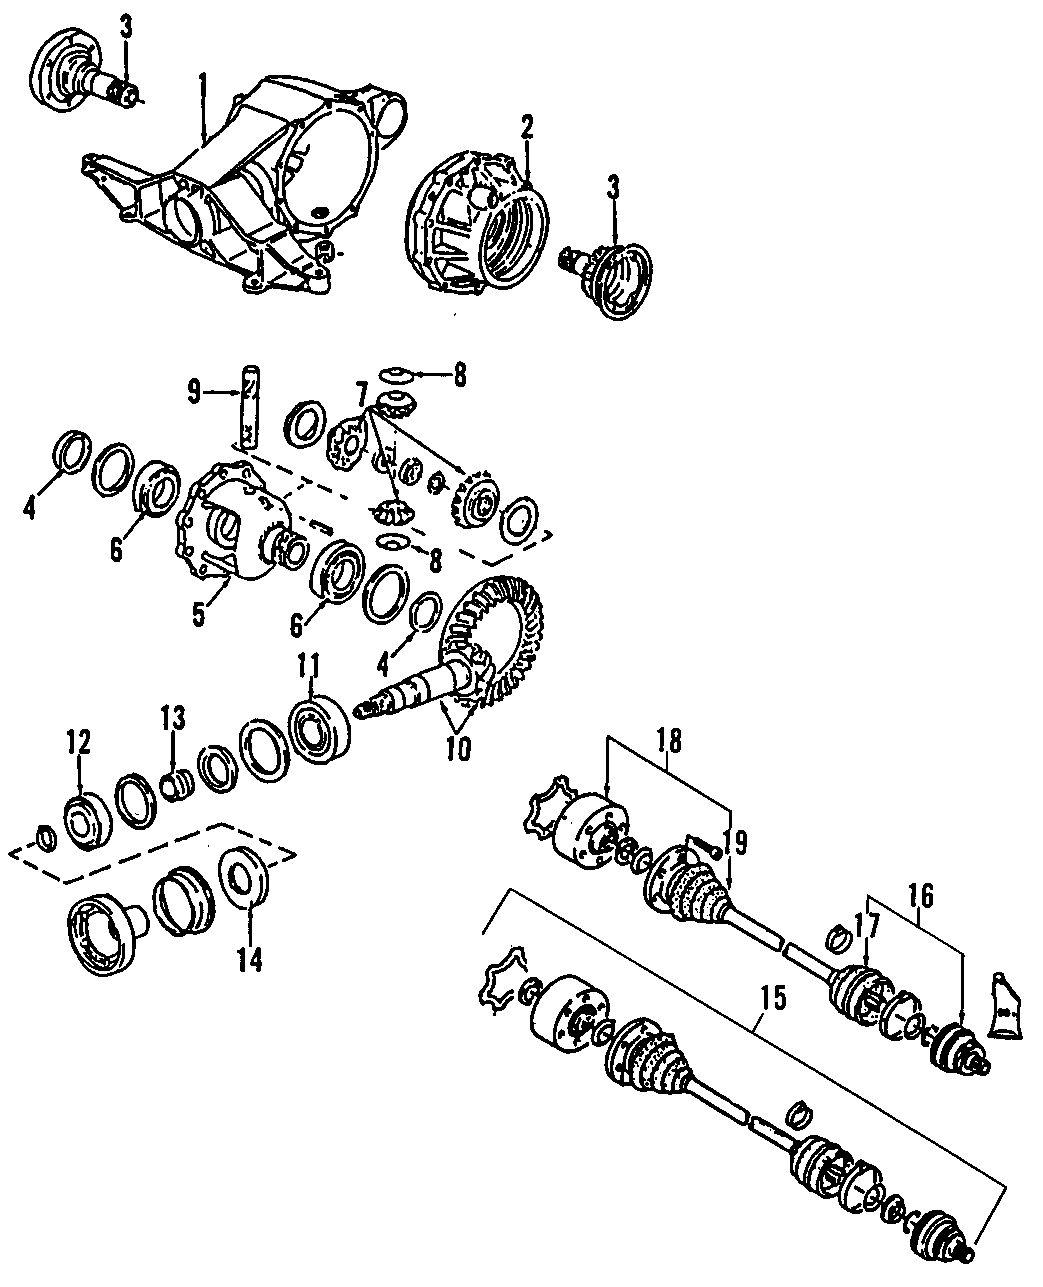 5DRIVE AXLES. REAR AXLE. AXLE SHAFTS & JOINTS. DIFFERENTIAL. PROPELLER SHAFT.https://images.simplepart.com/images/parts/motor/fullsize/F220090.png